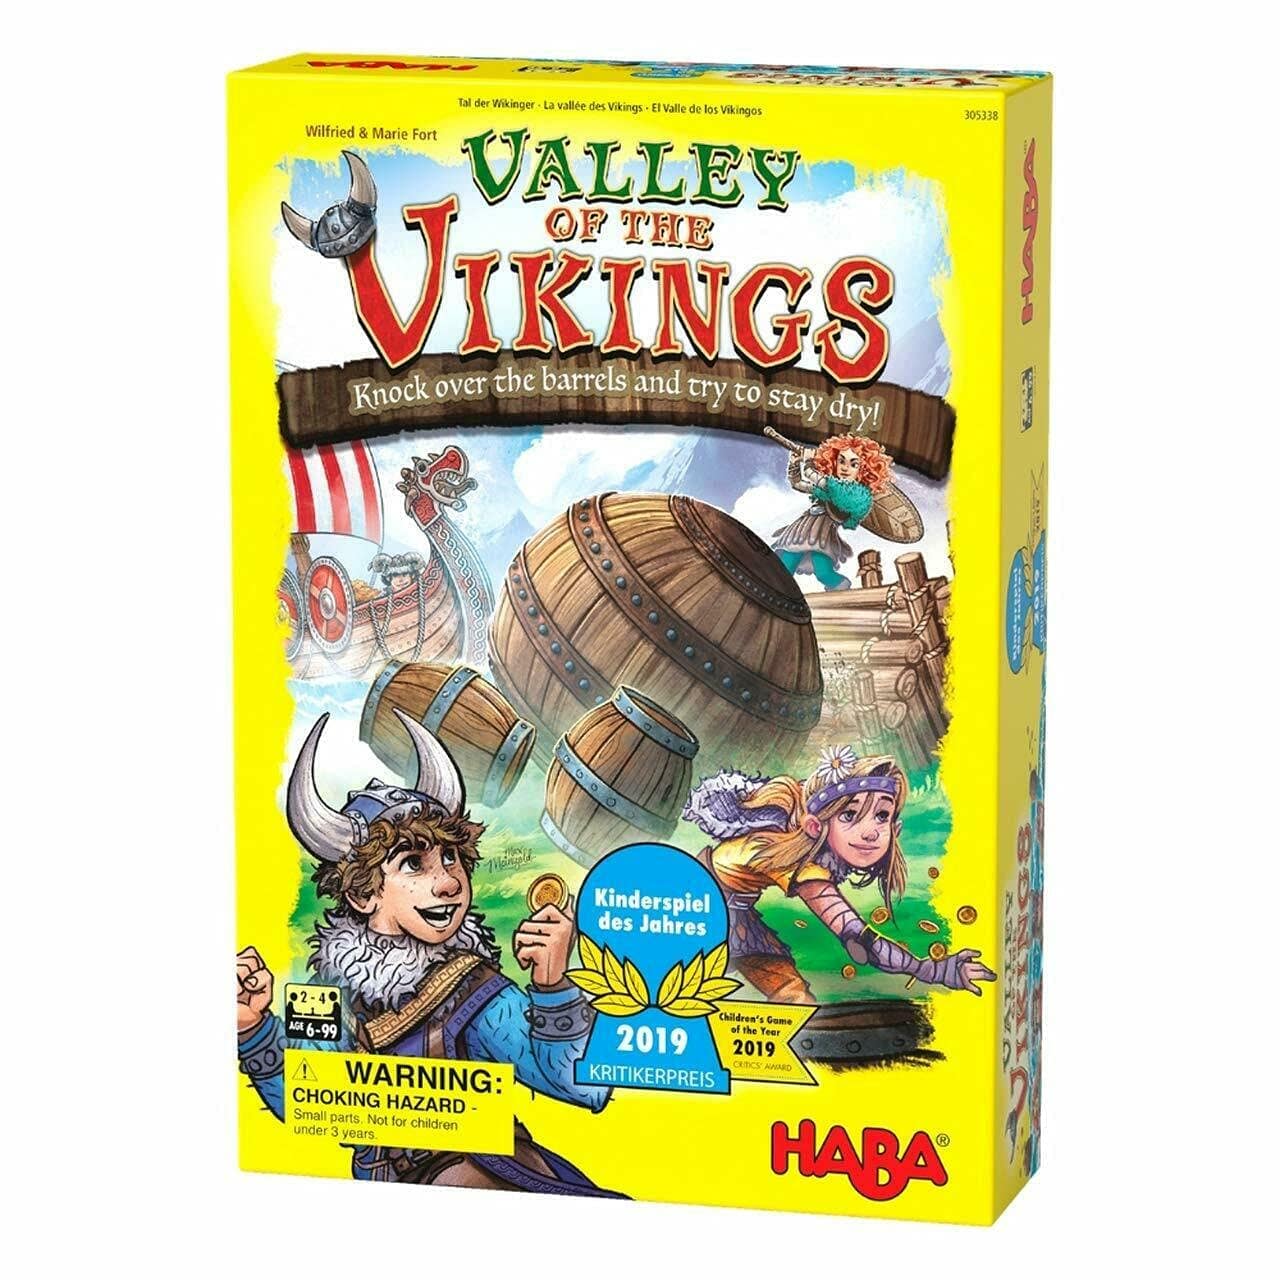 Haba Usa Valley of the Vikings - Lost City Toys